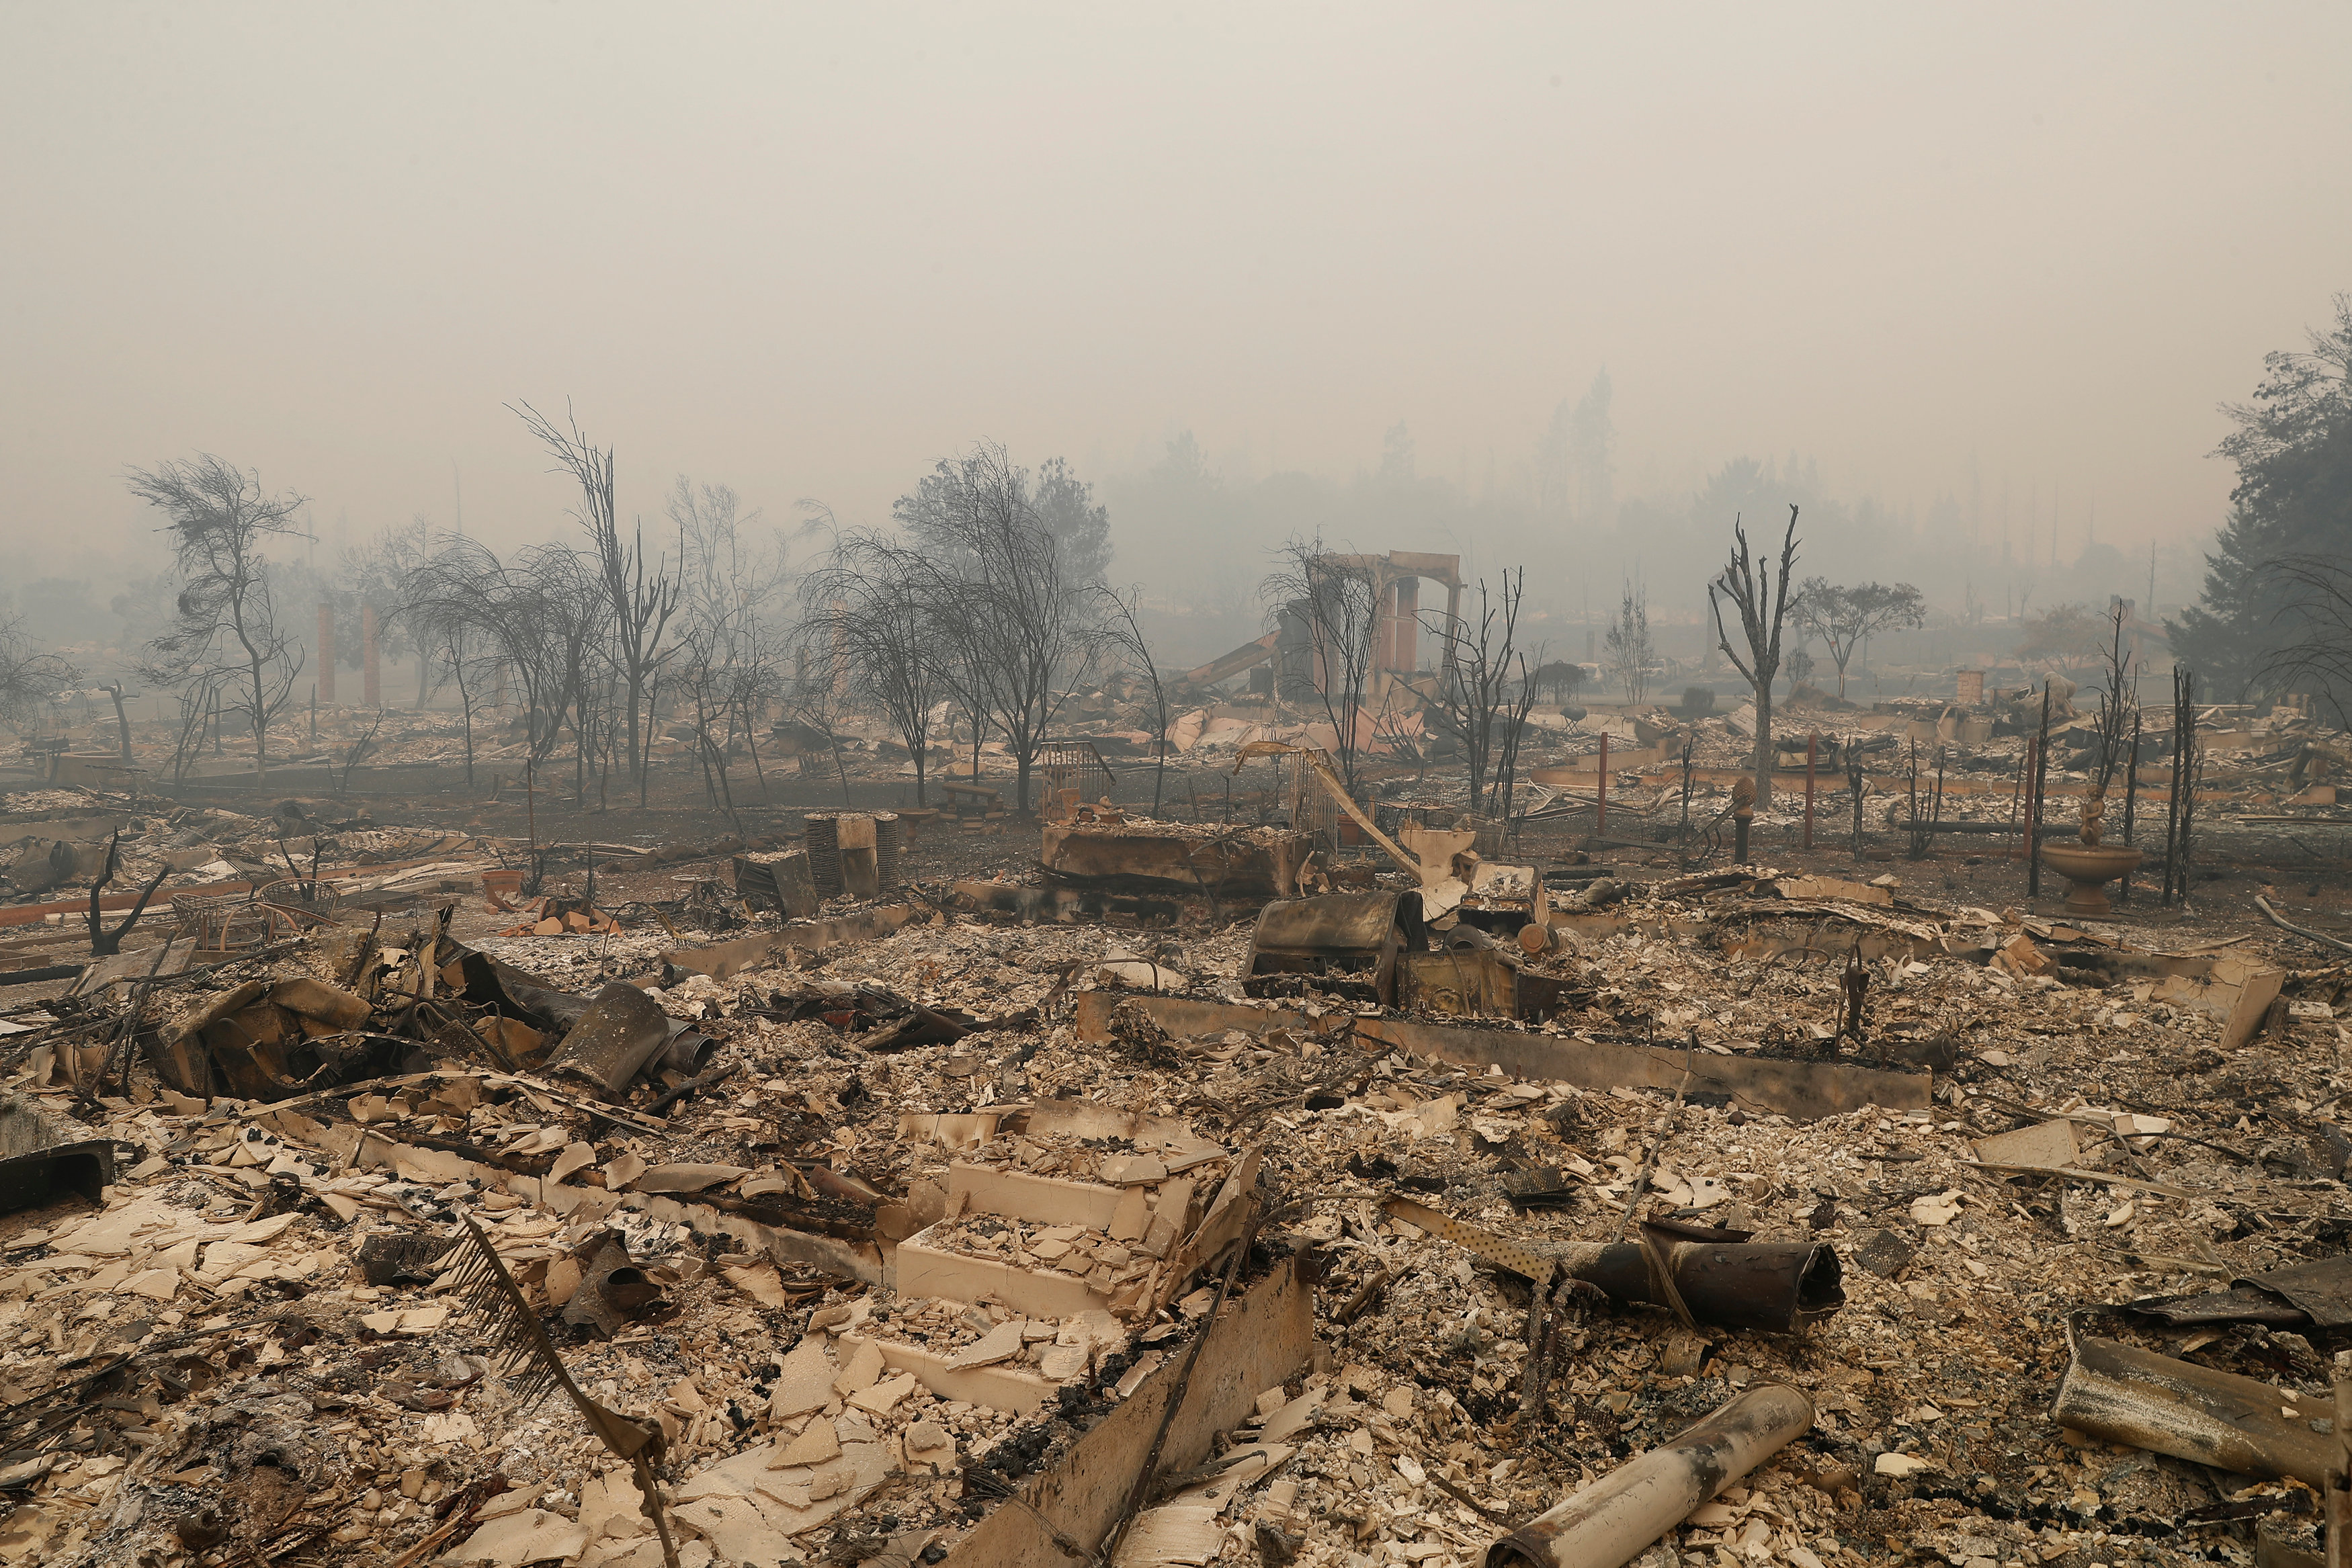 150 missing as California wildfires kill 15, destroy 1,500 homes and other buildings